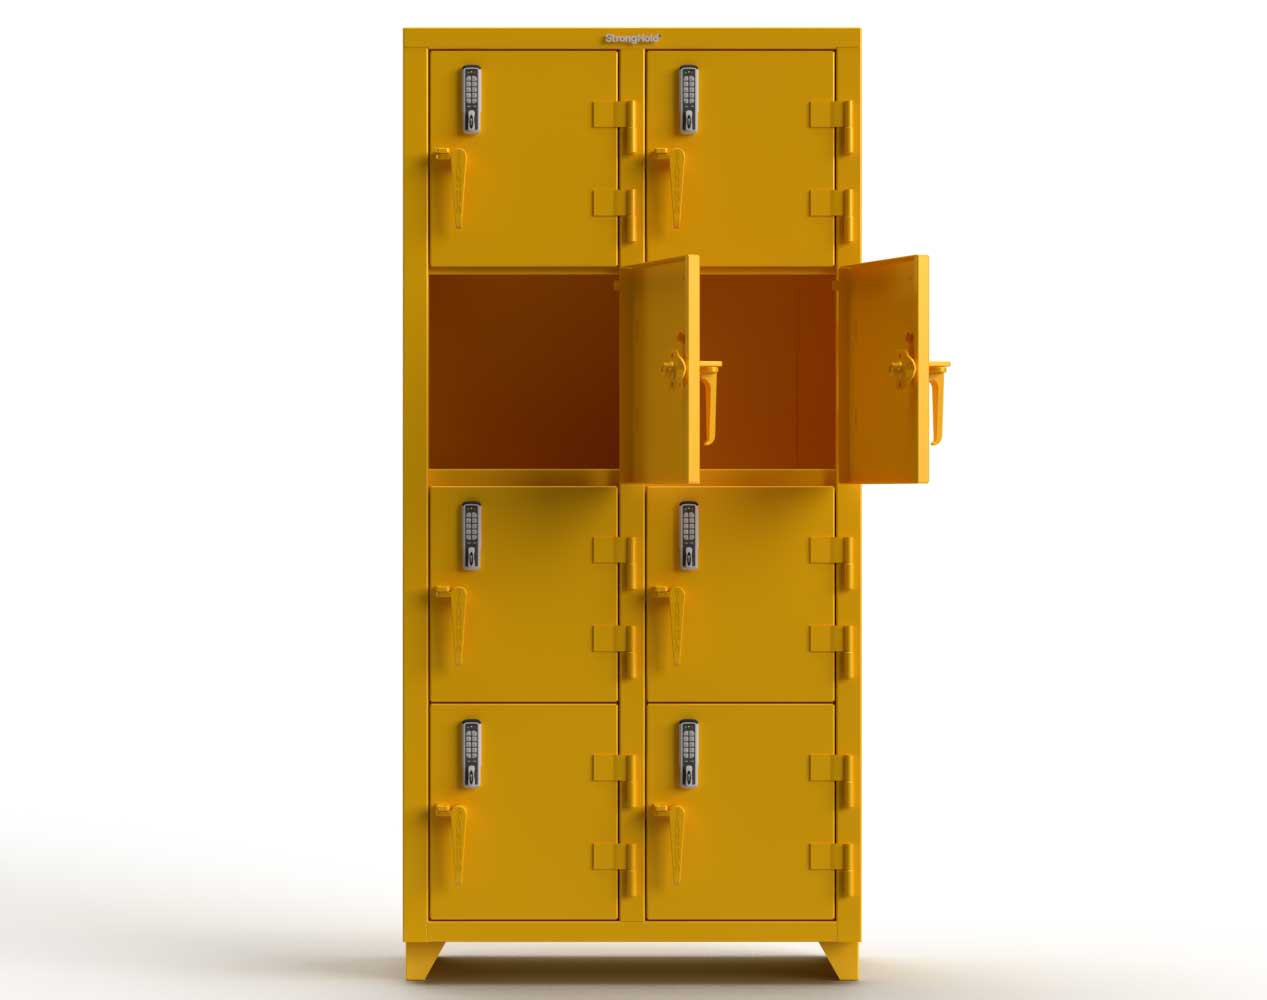 Extra Heavy Duty 14 GA 4-Tier Locker with Keyless Entry Lock, 8 Compartments – 36 in. W x 18 in. D x 75 in. H